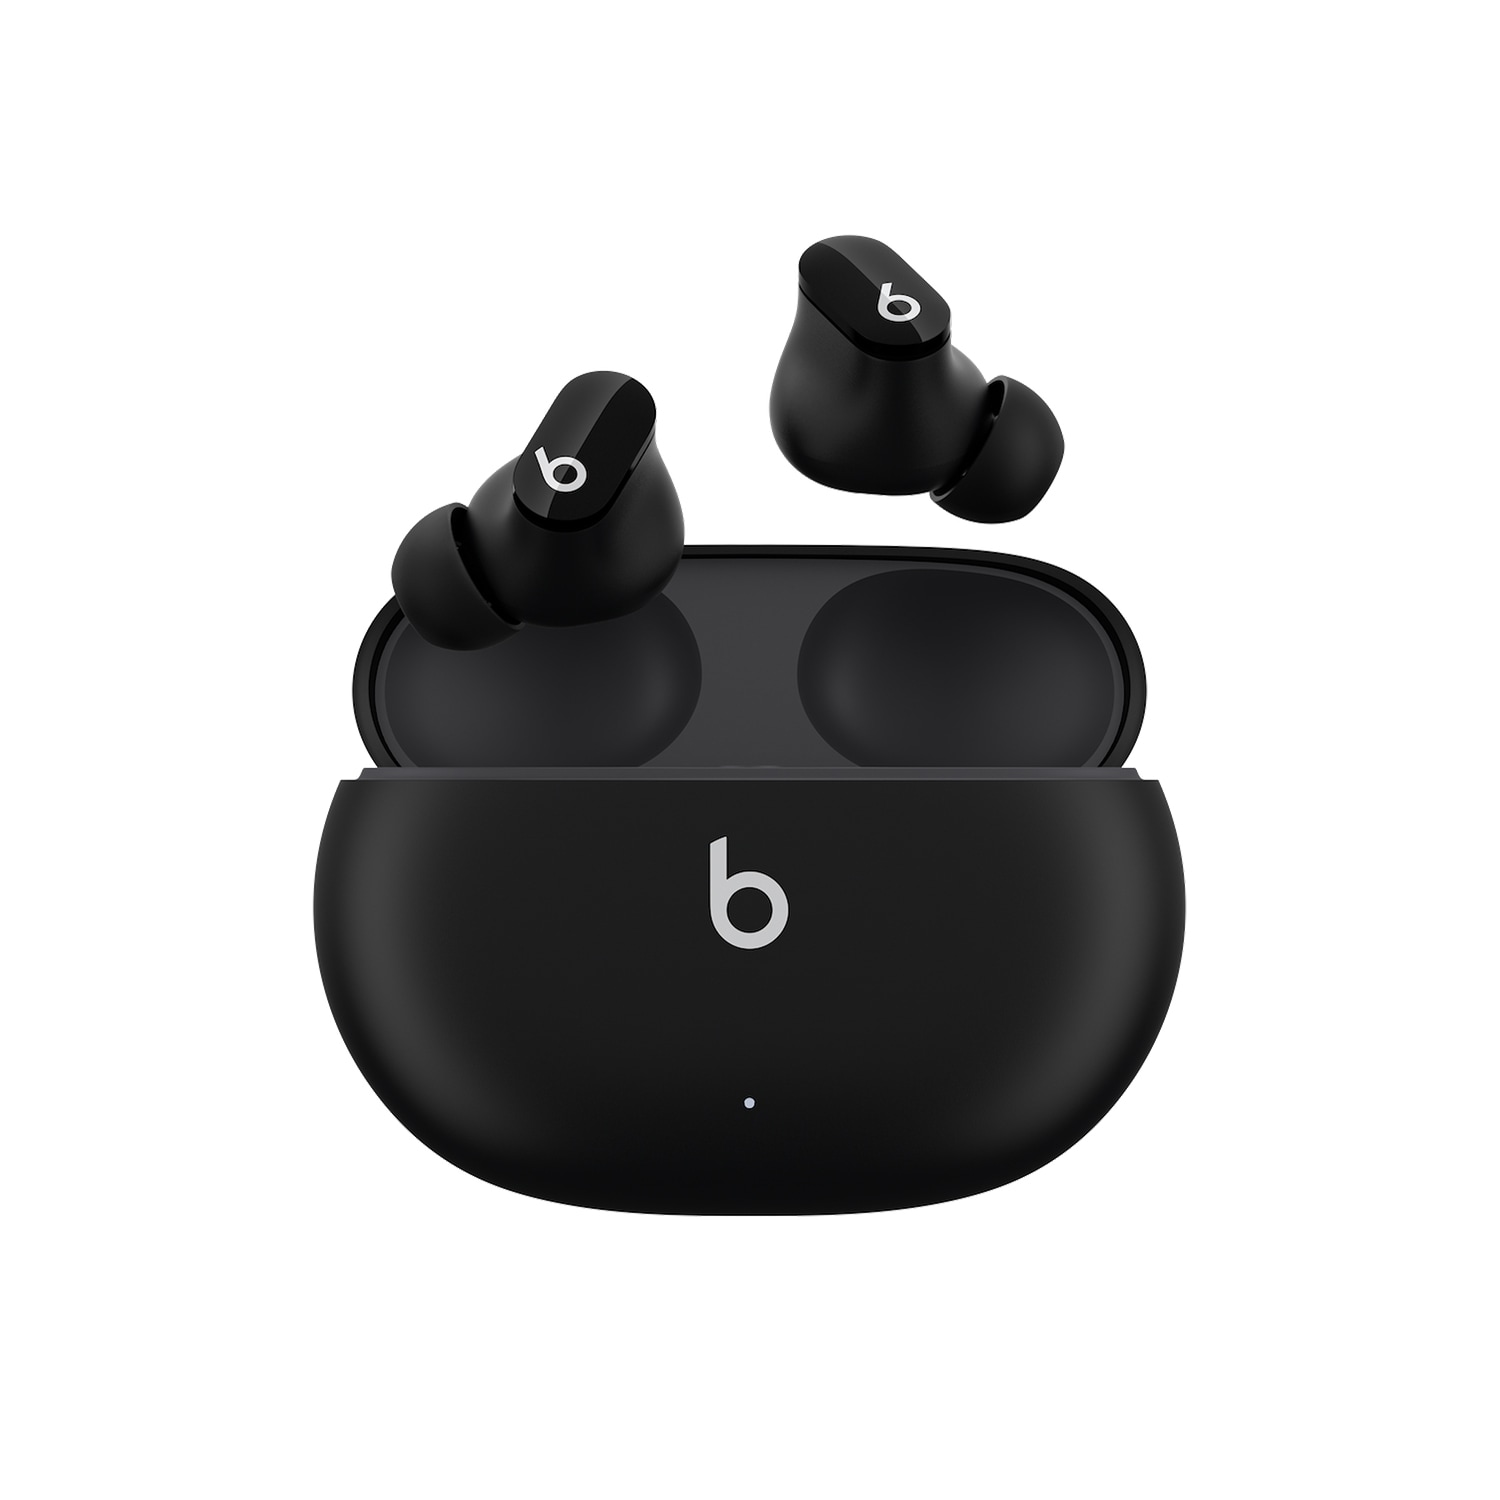 Beats by Dr. Dre Earbud Wireless Noise Canceling Headphones at 